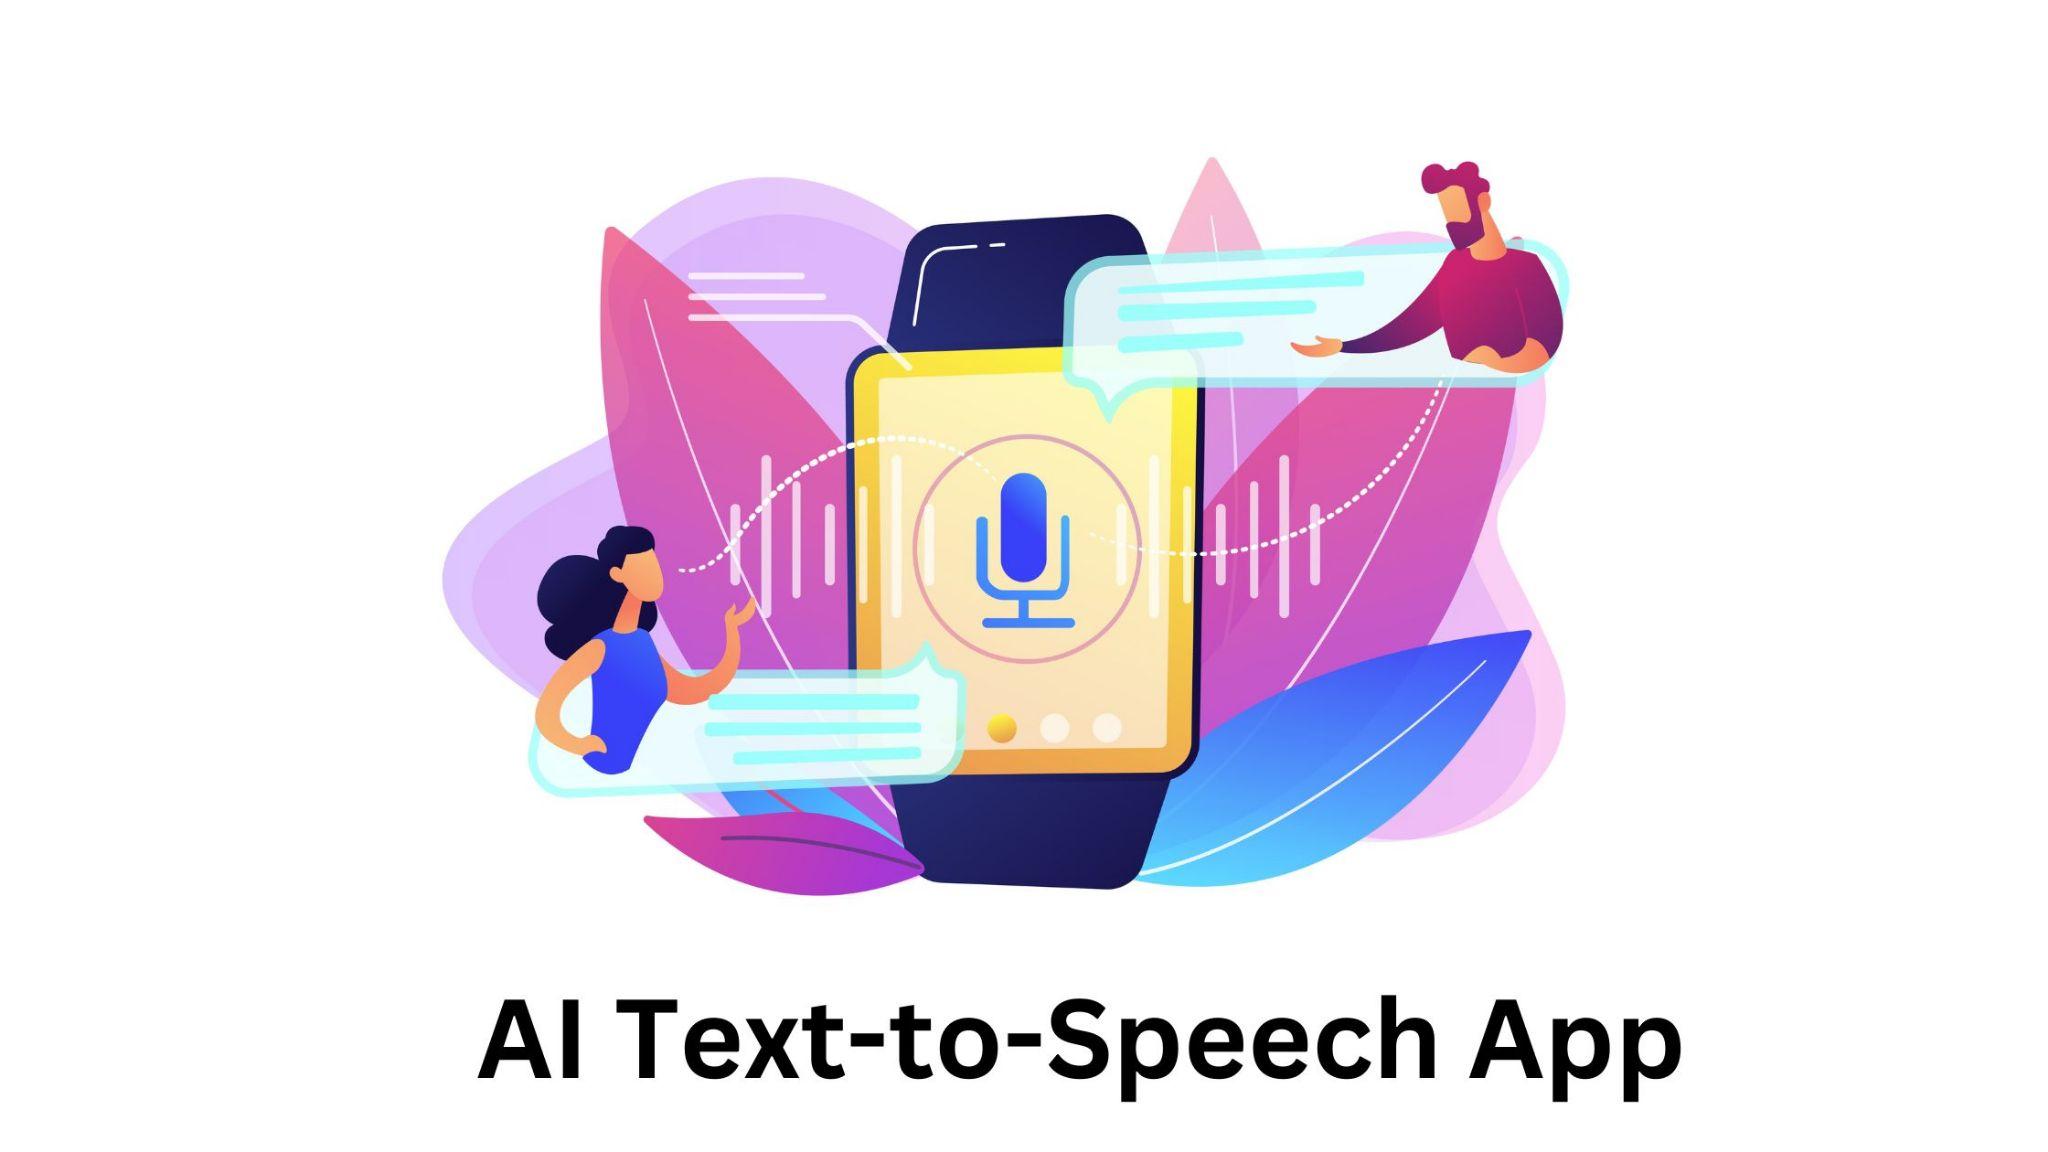 How to Develop an AI Text-to-Speech App: A Step-by-Step Guide